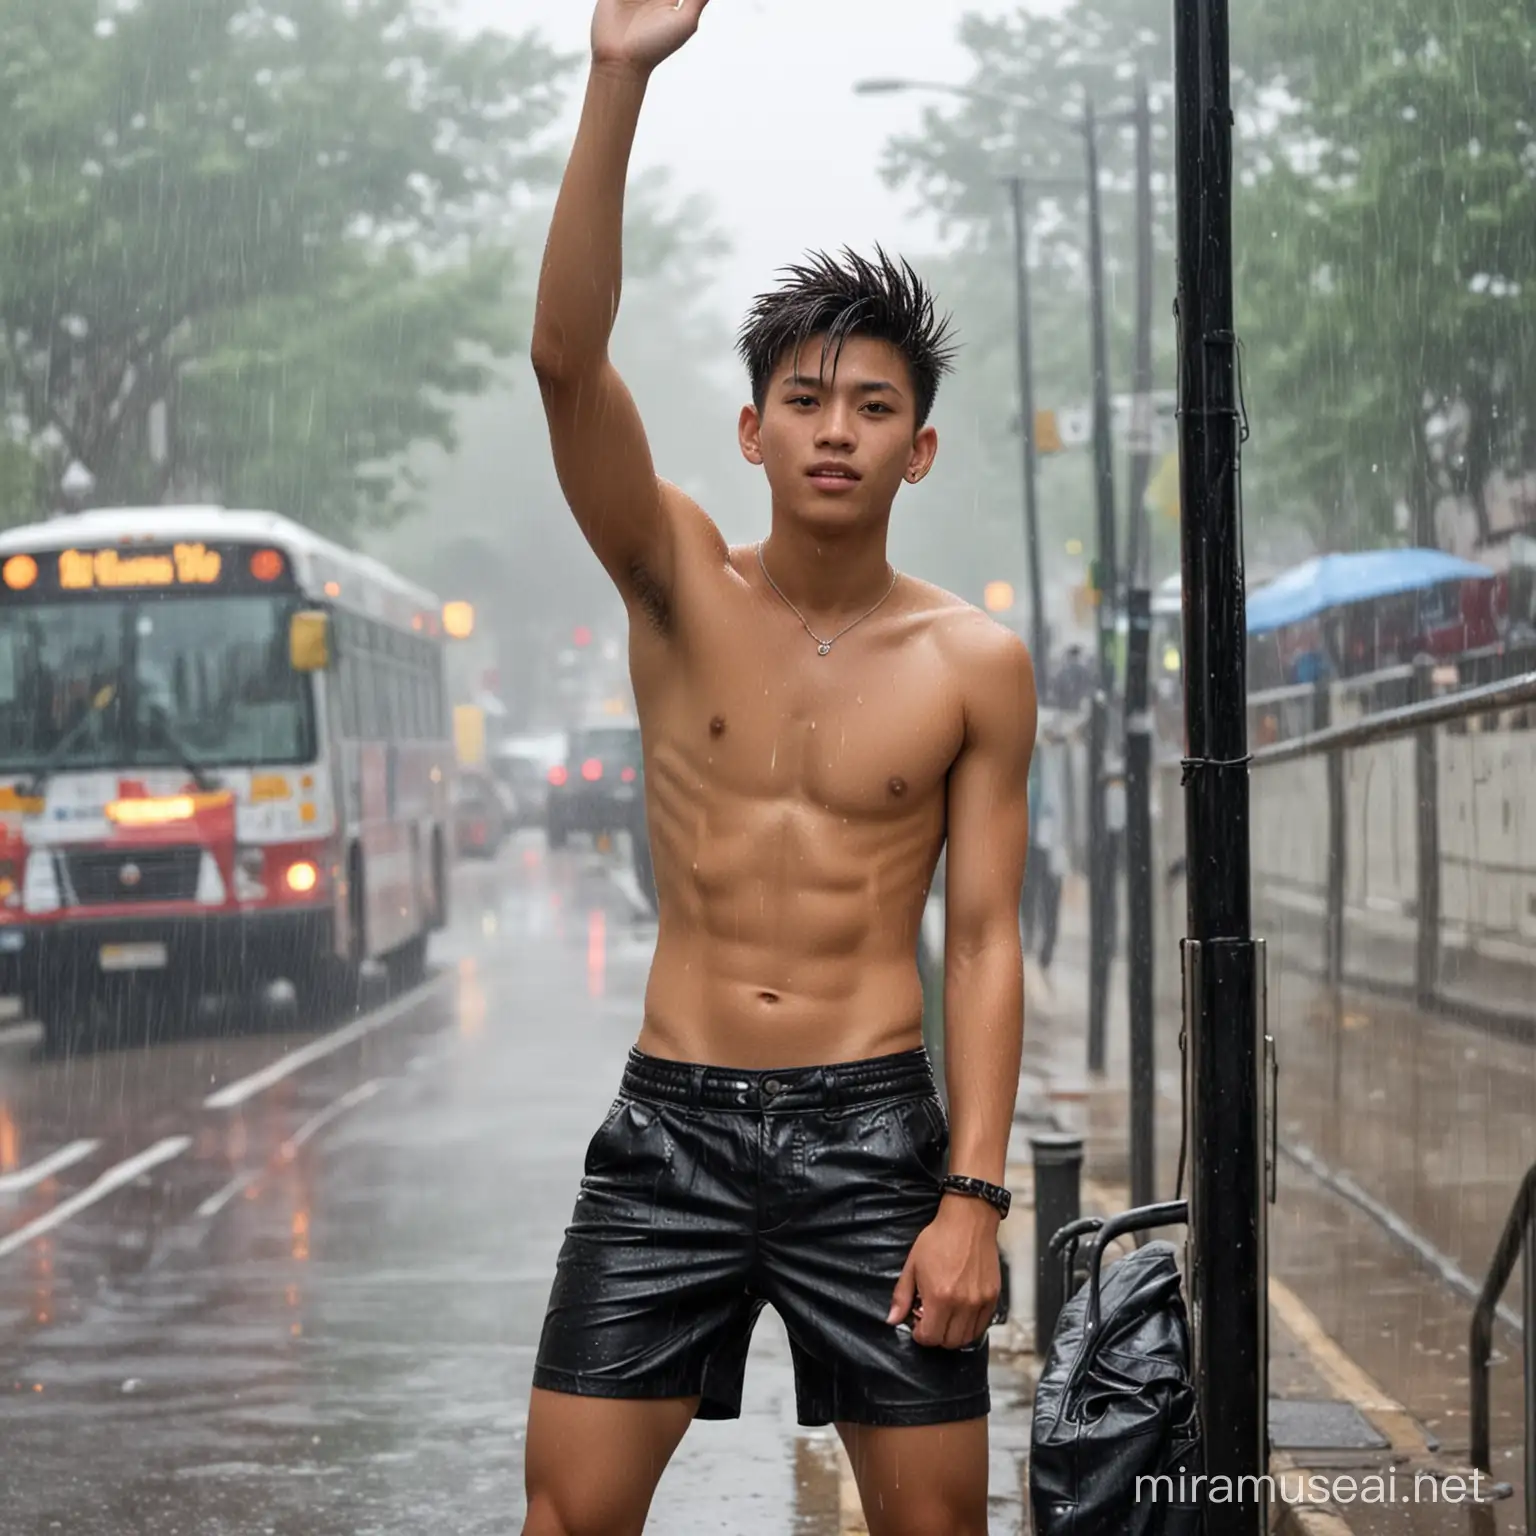 Asian Teen in Leather Shorts Raising Arm at Rainy Bus Stop